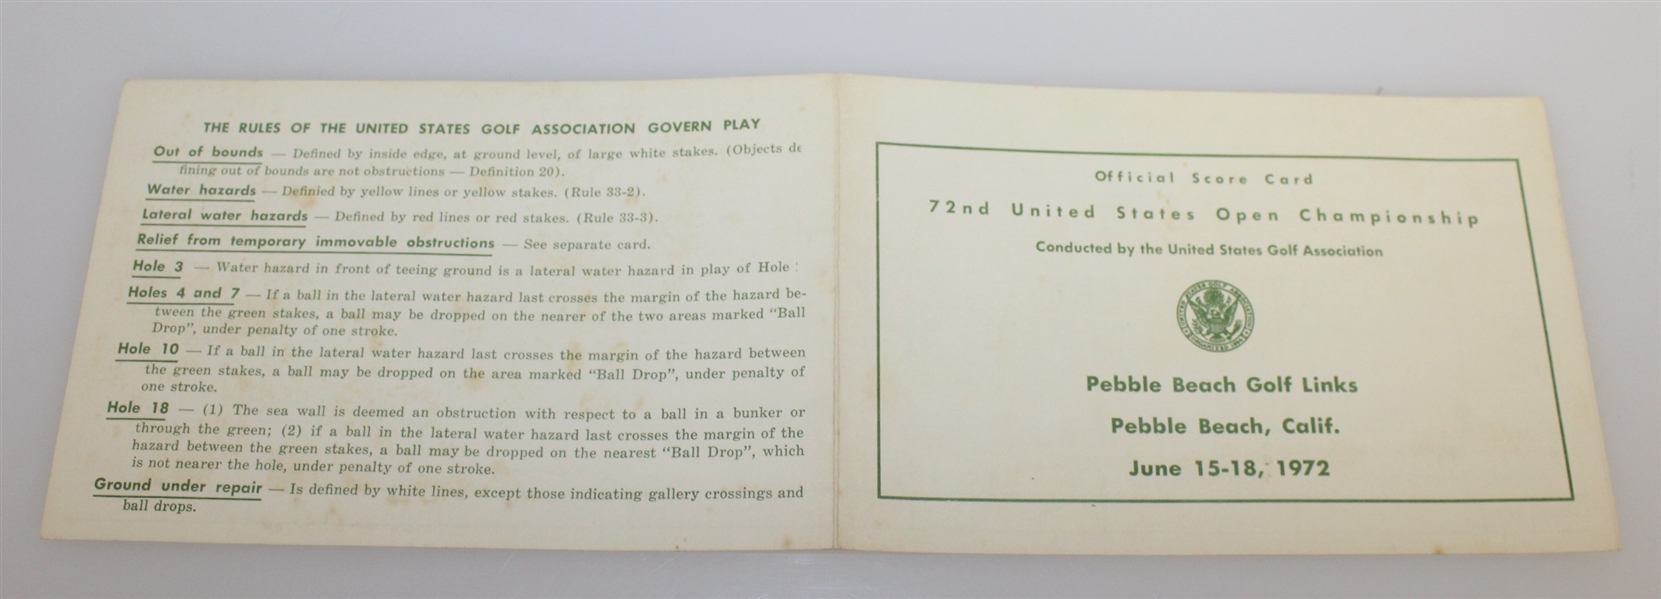 1972 US Open at Pebble Beach Official Scorecard - Jack Nicklaus Win